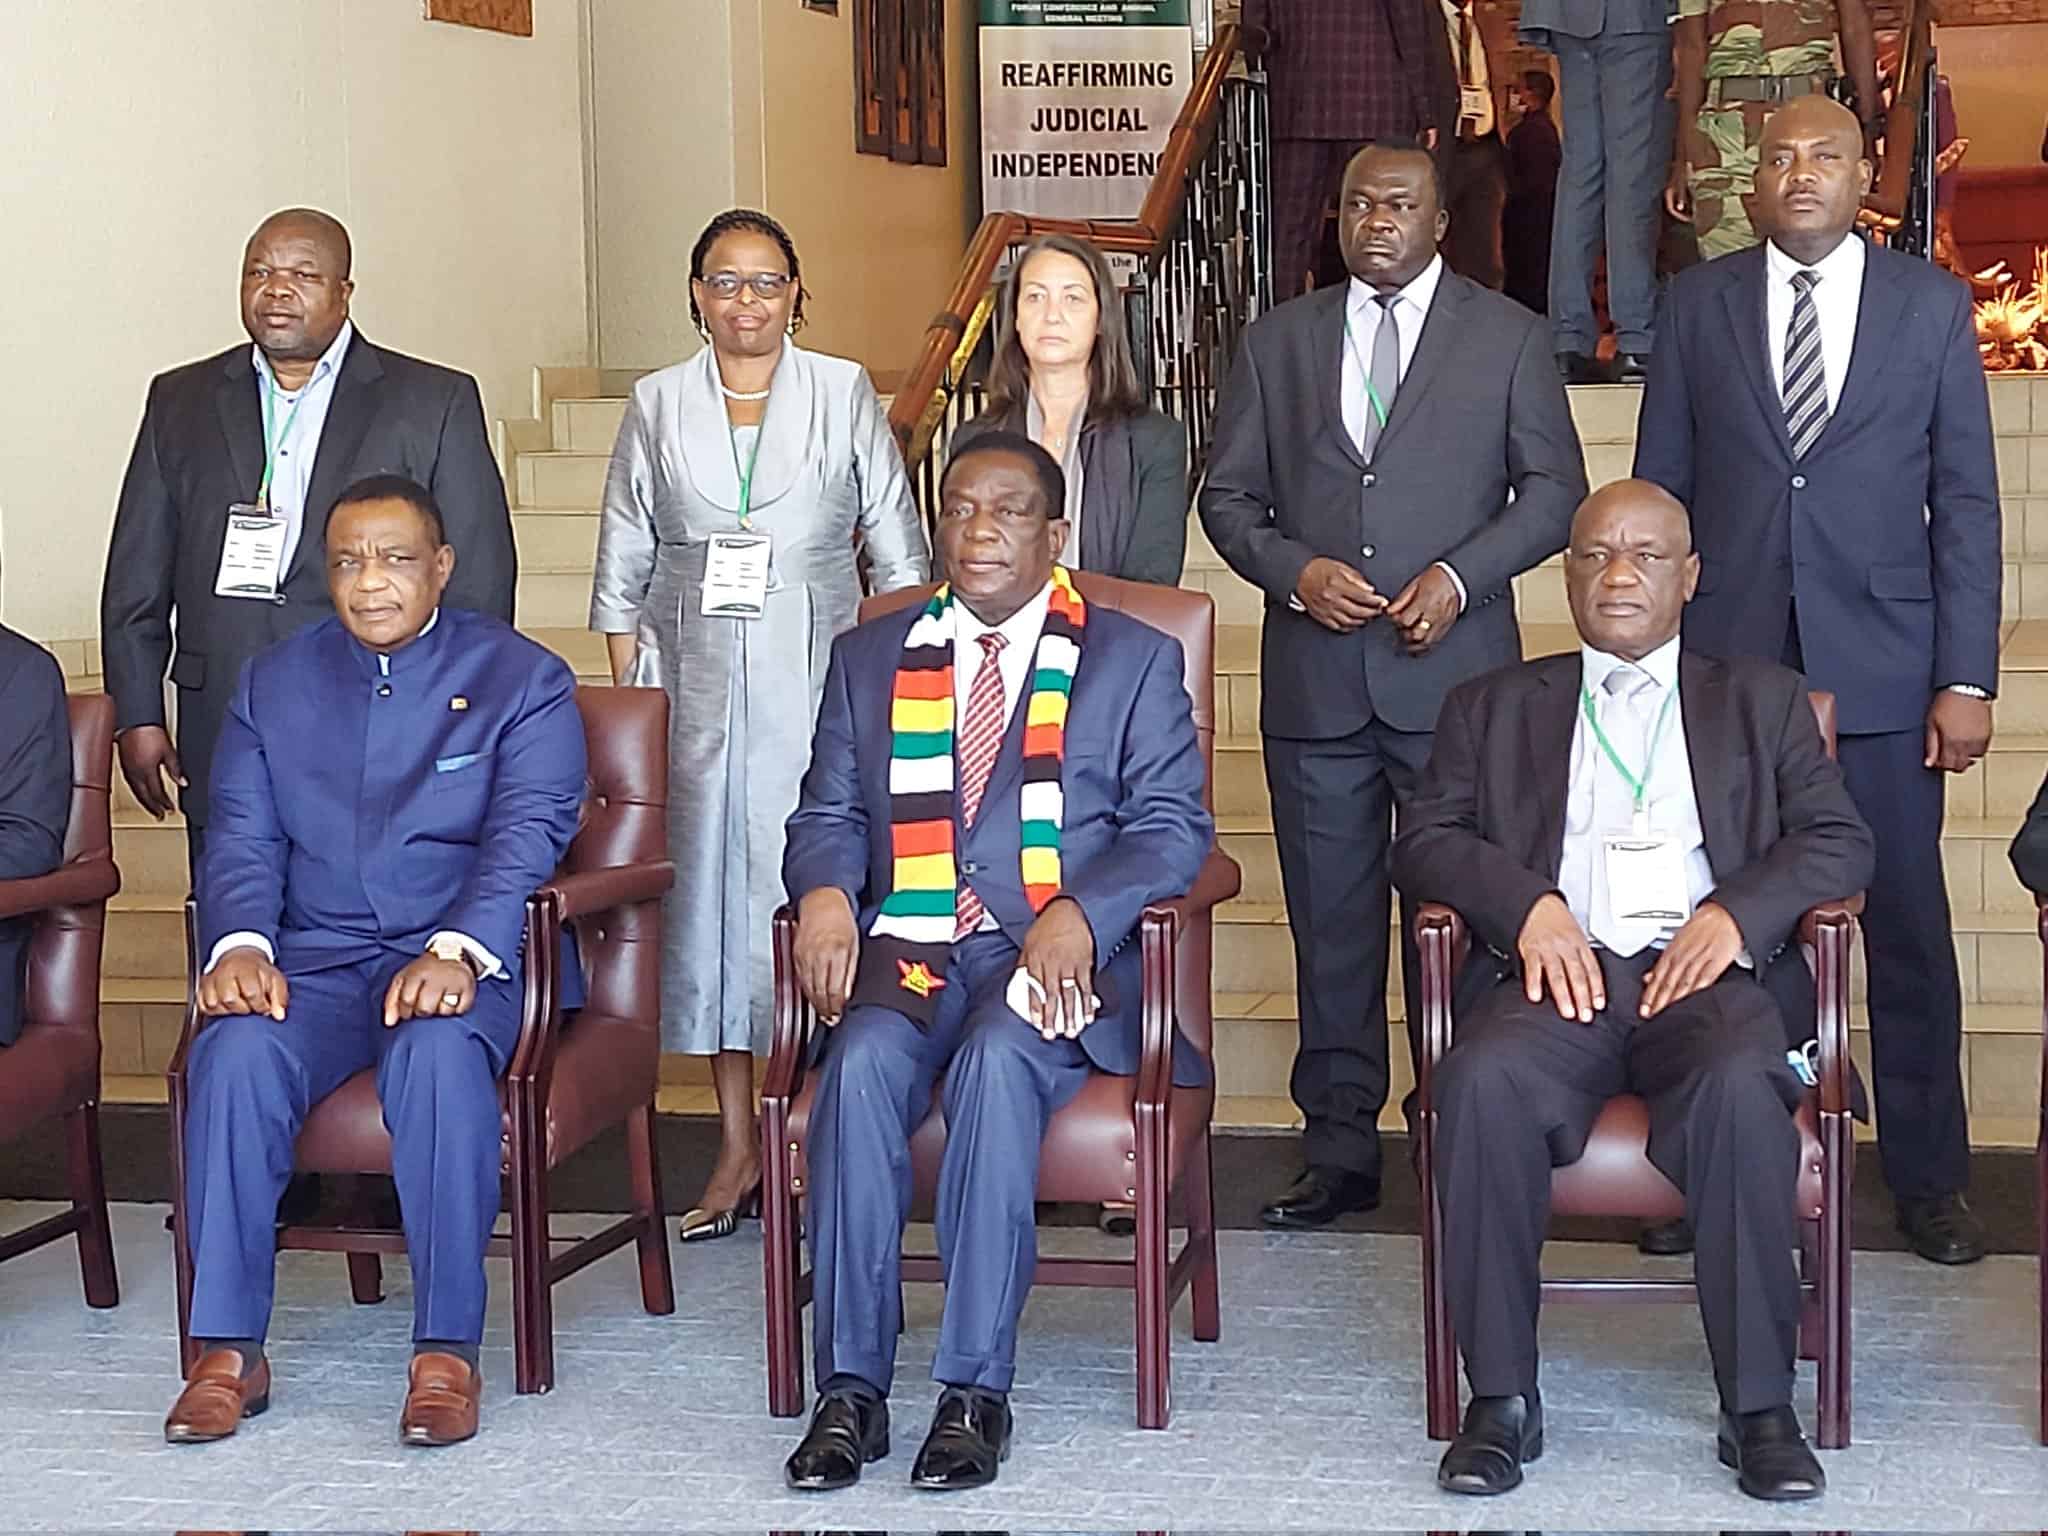 Our judges’ appointment system is best, they are subjected to public interviews- President Mnangagwa